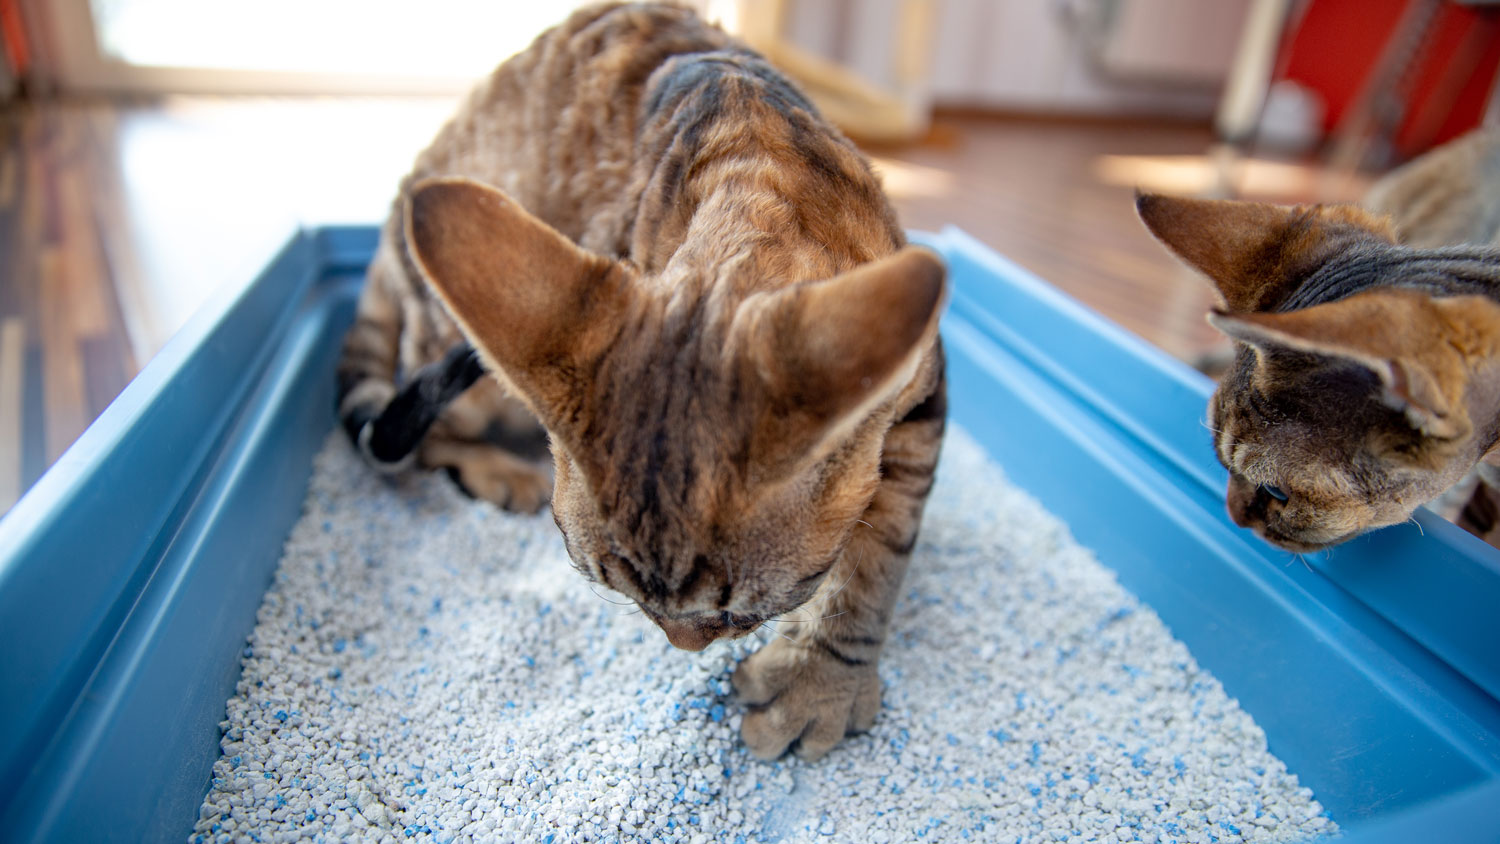 Devon Rex kitten digging sand in the litter box while being watched by a curious brother